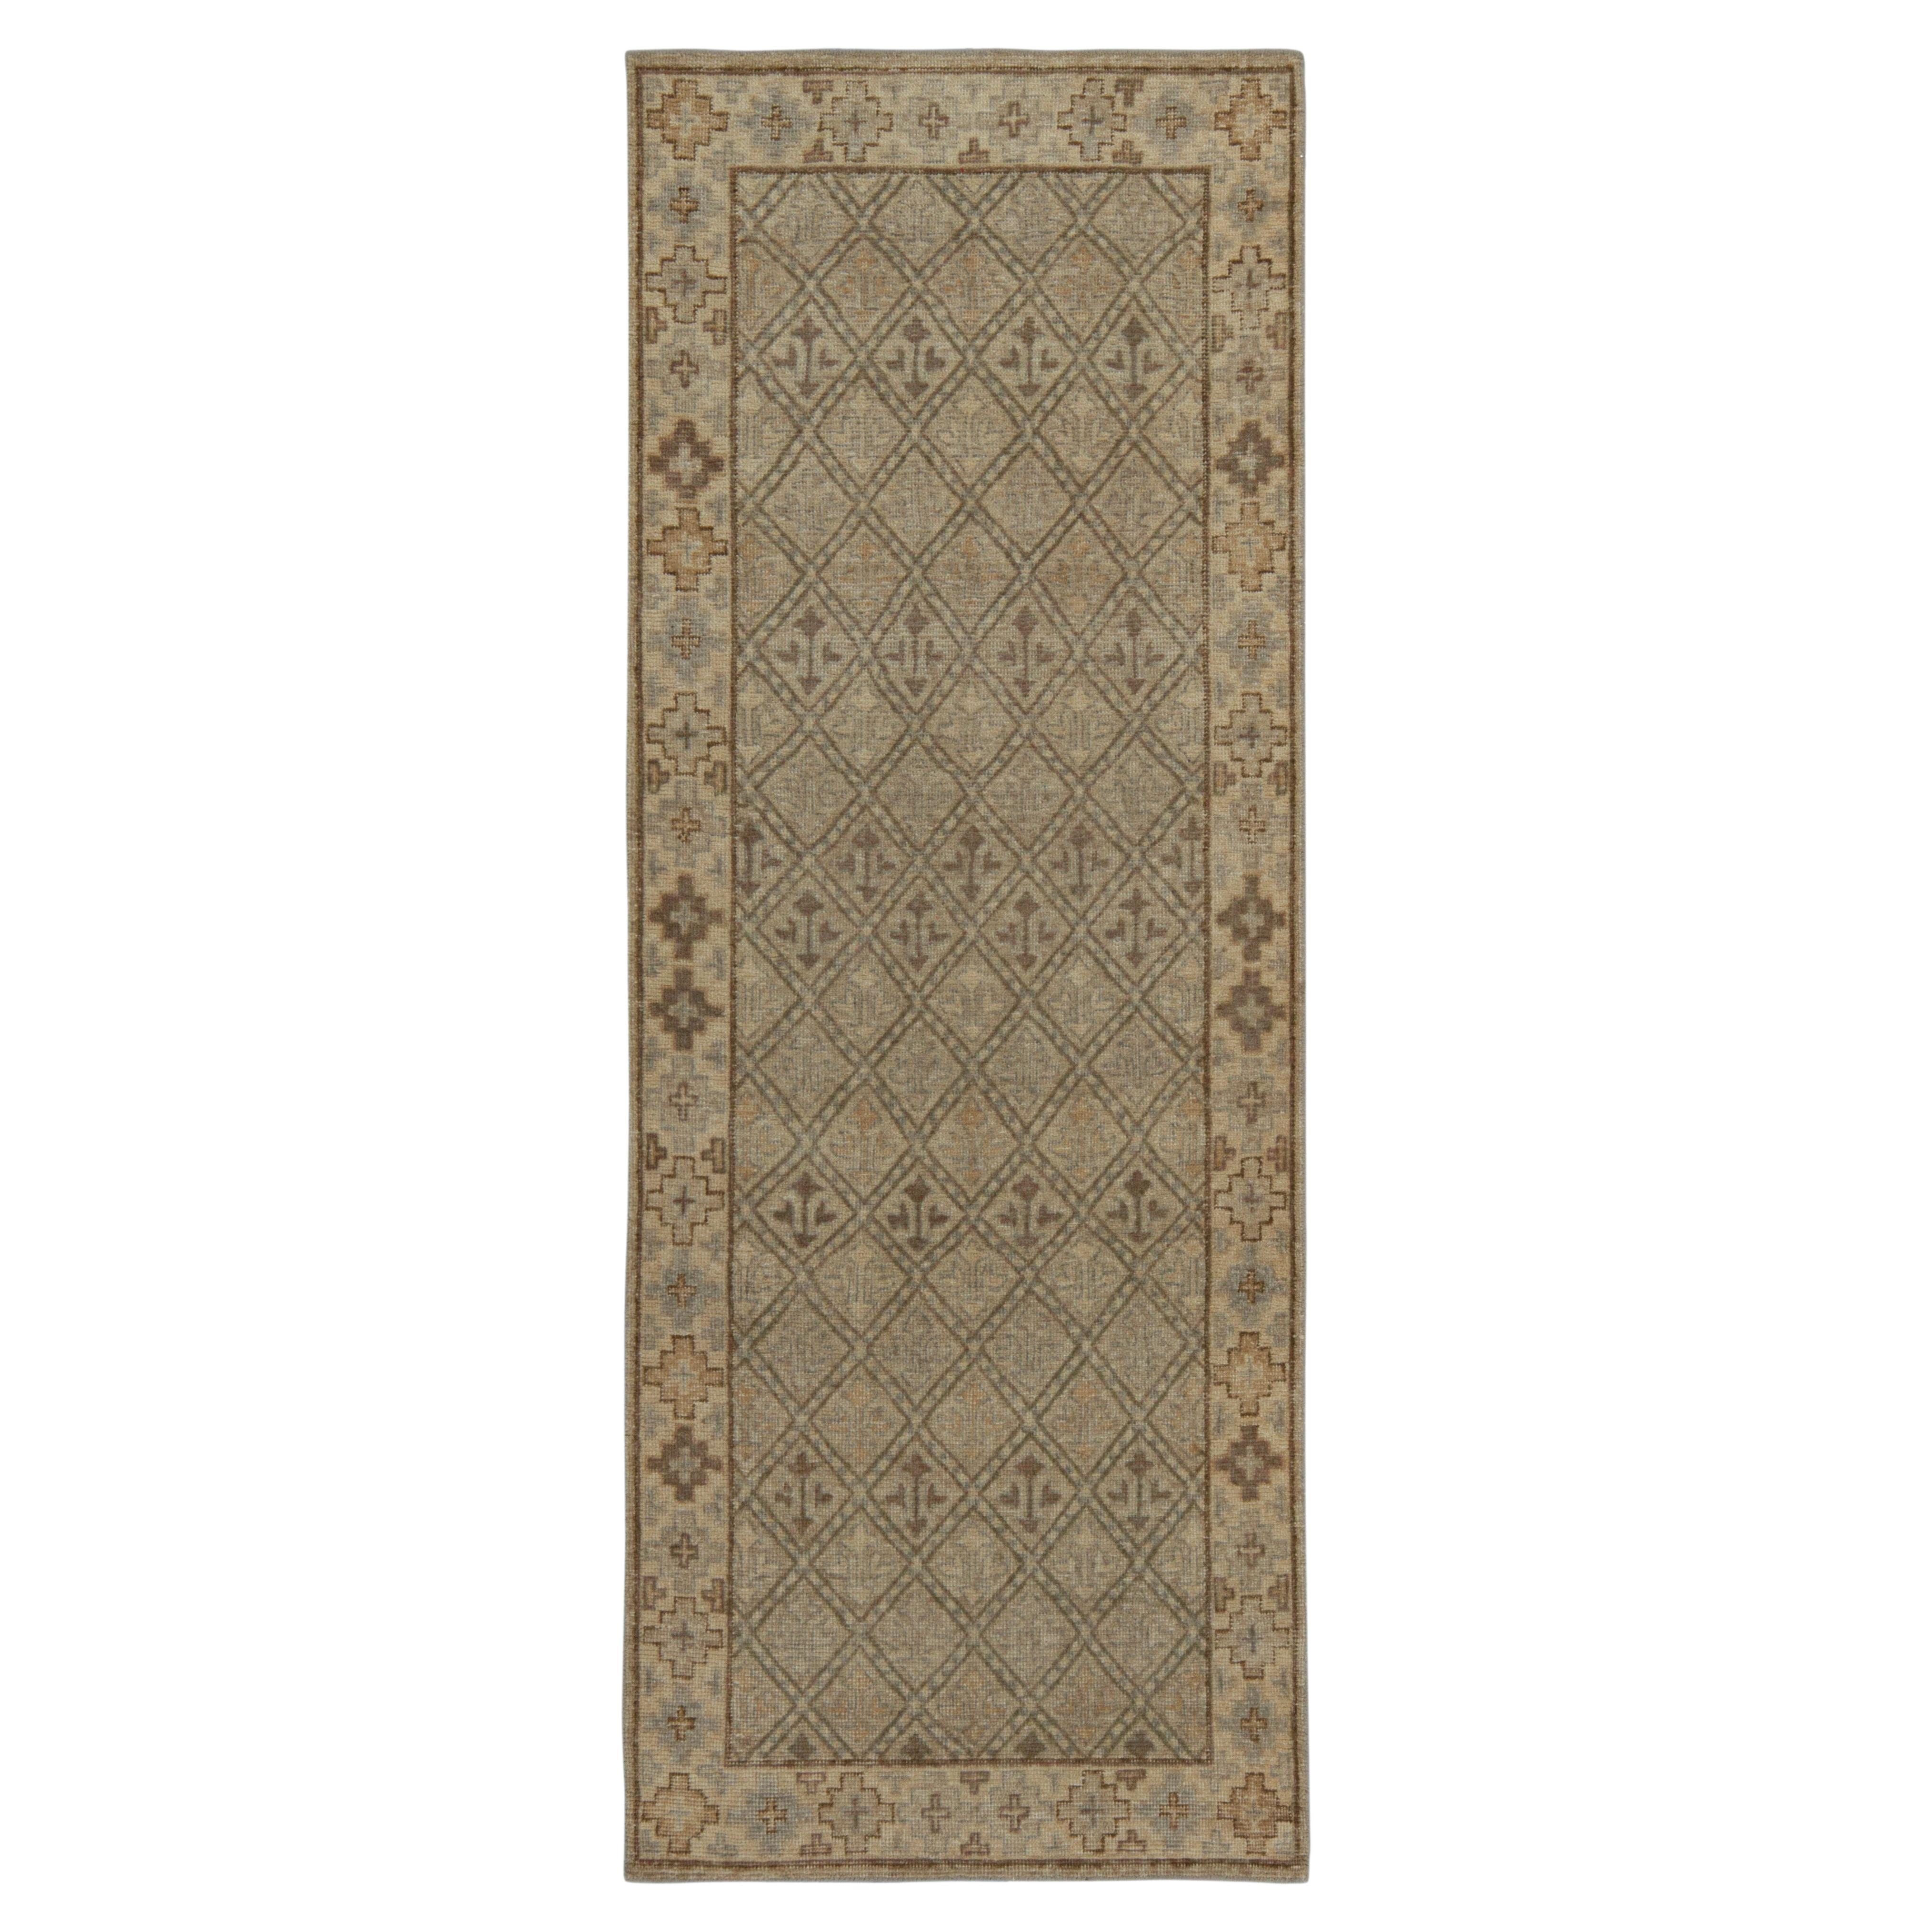 Rug & Kilim’s Distressed Style Runner in Beige-Brown & Gray Tribal Patterns For Sale